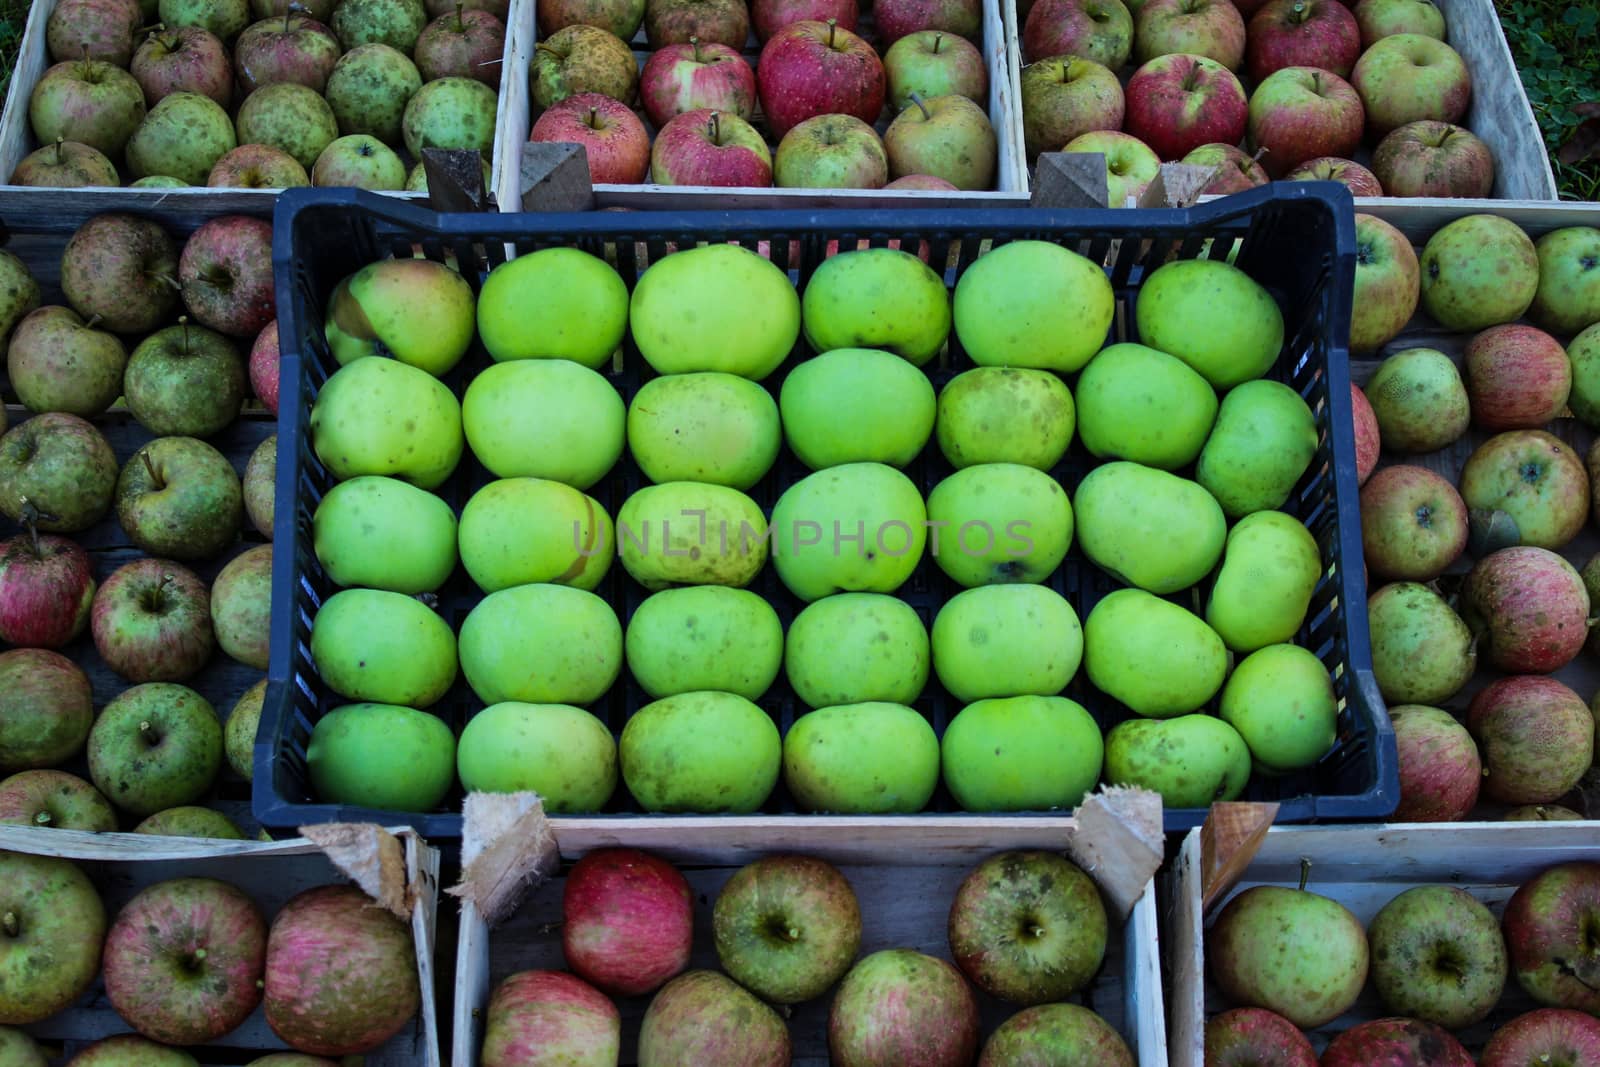 Crate of green-yellow apples in the middle on other homegrown apples in wooden crates. Zavidovici, Bosnia and Herzegovina.